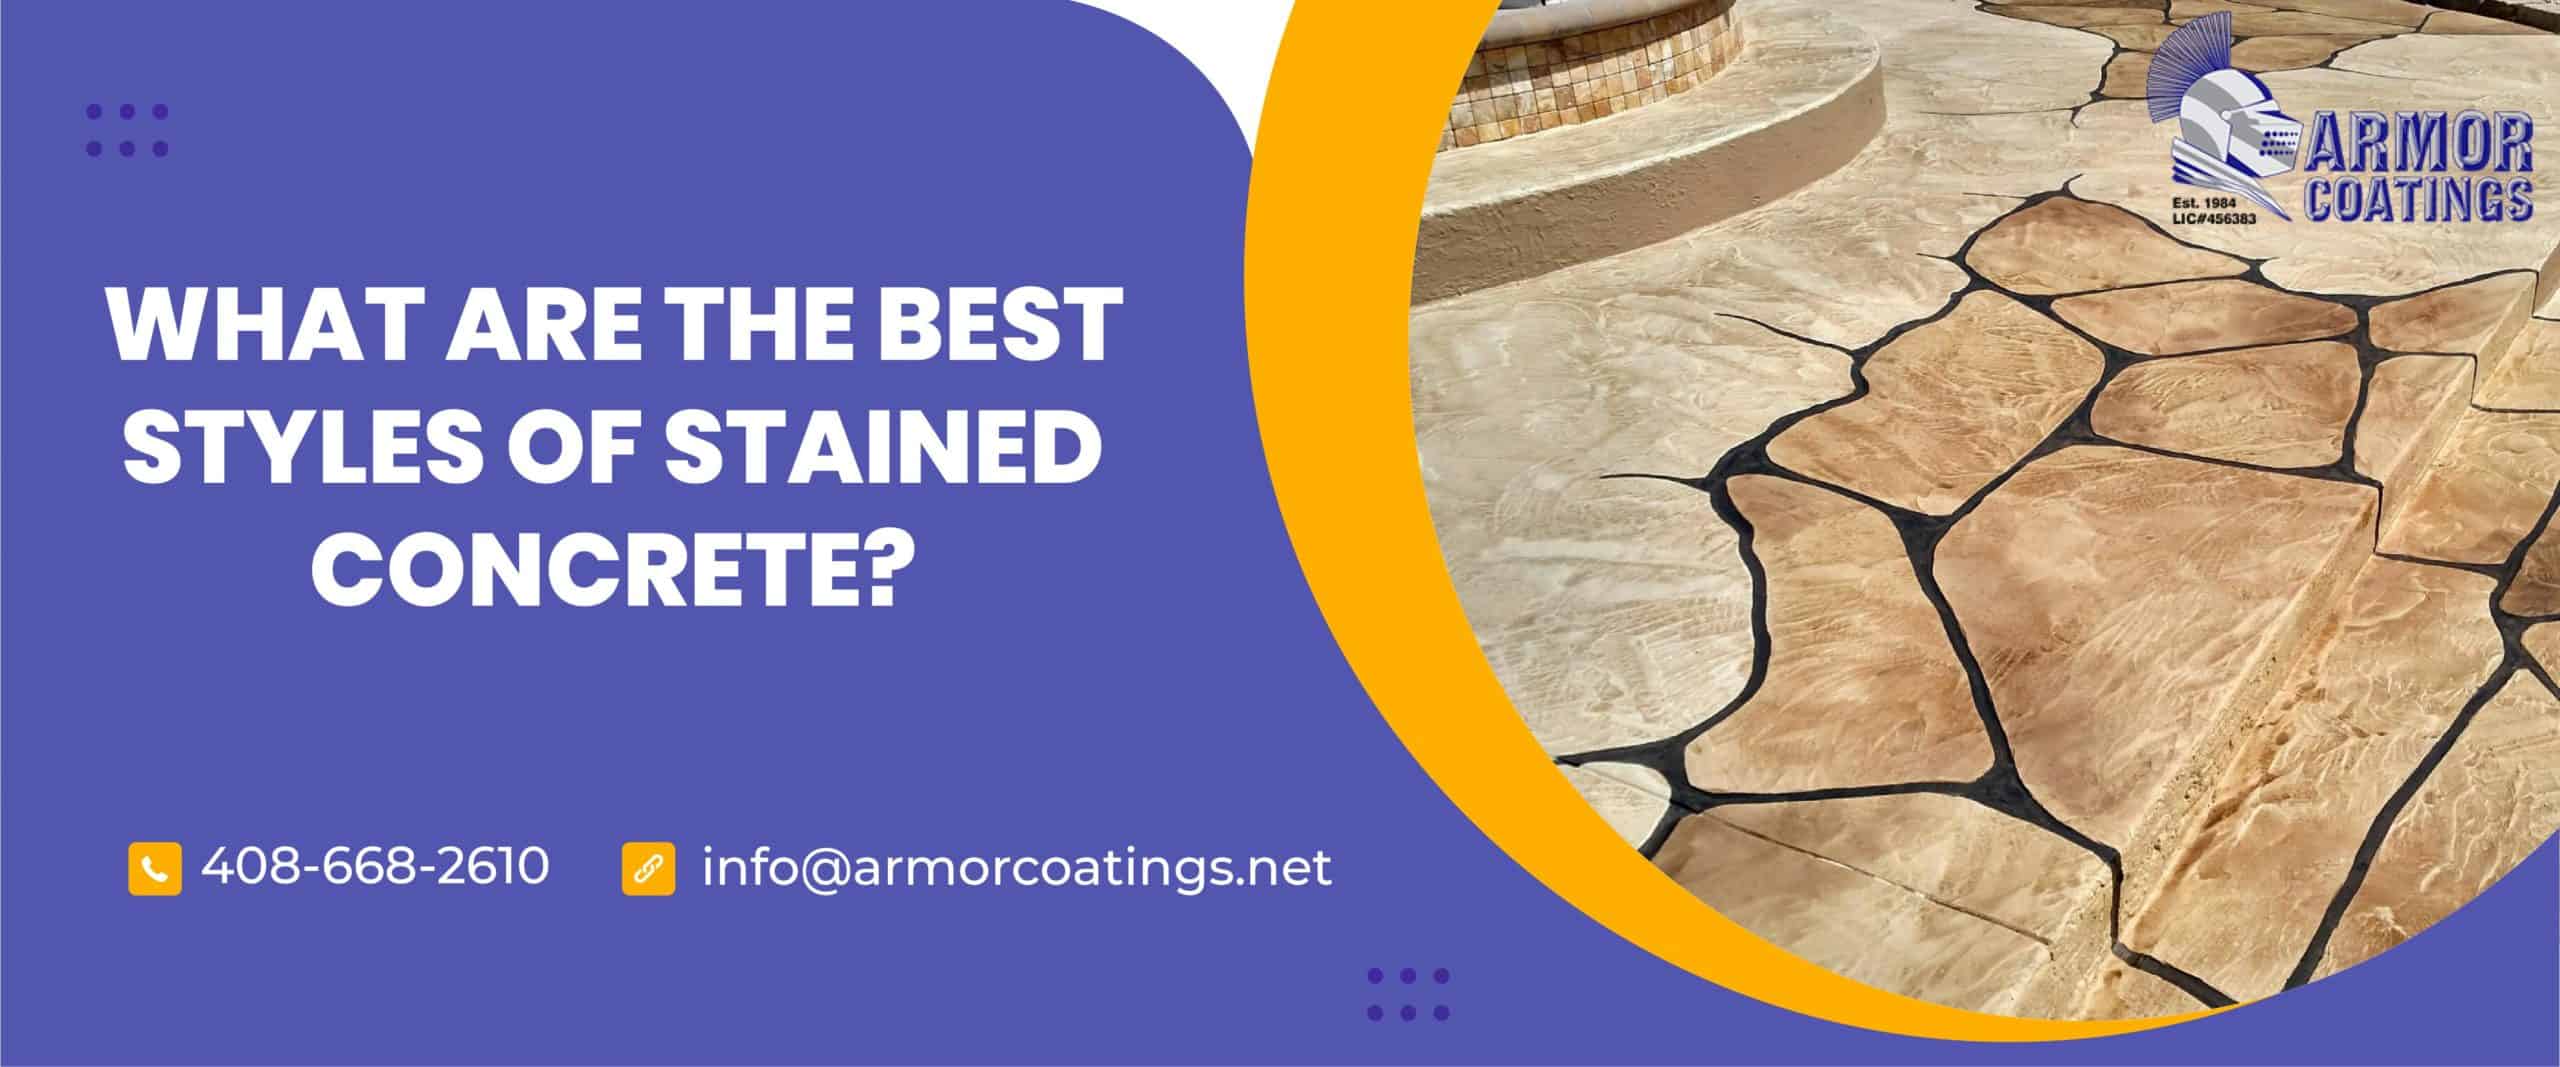 best styles of stained concrete